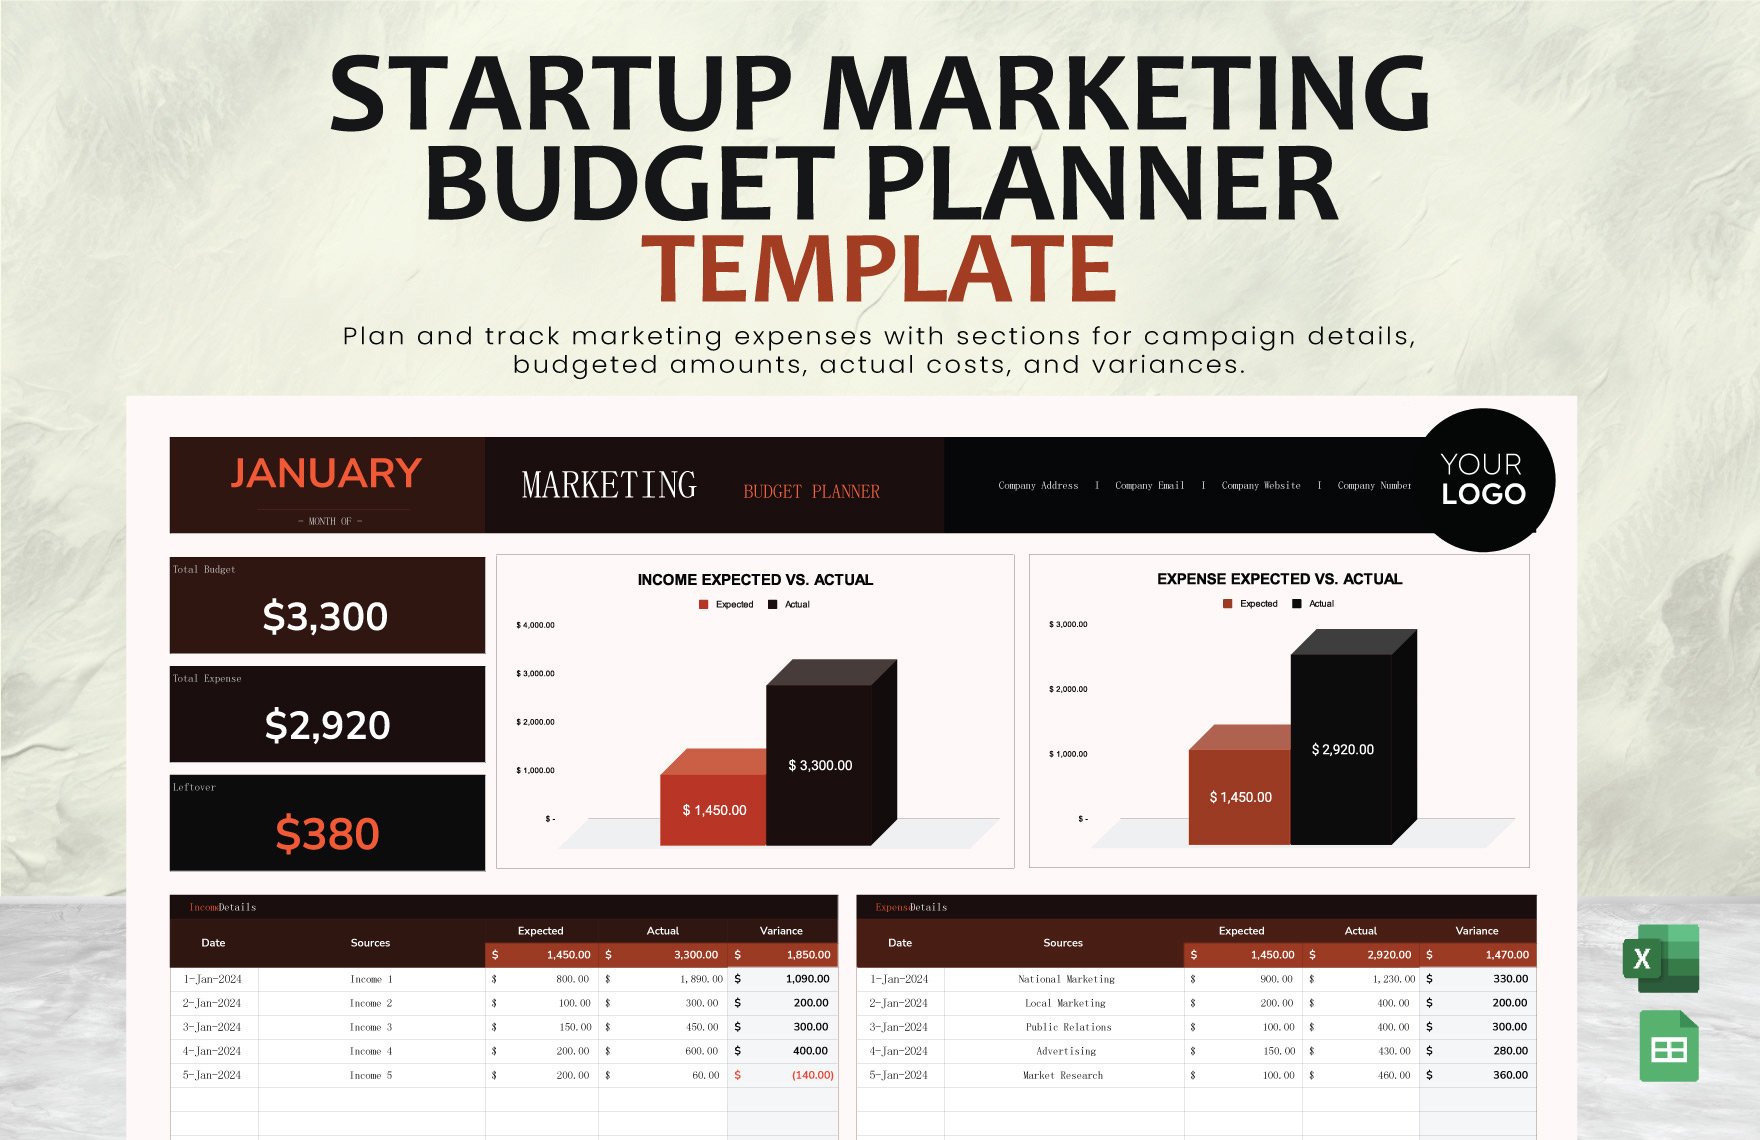 Startup Marketing Budget Planner Template in Excel, Google Sheets